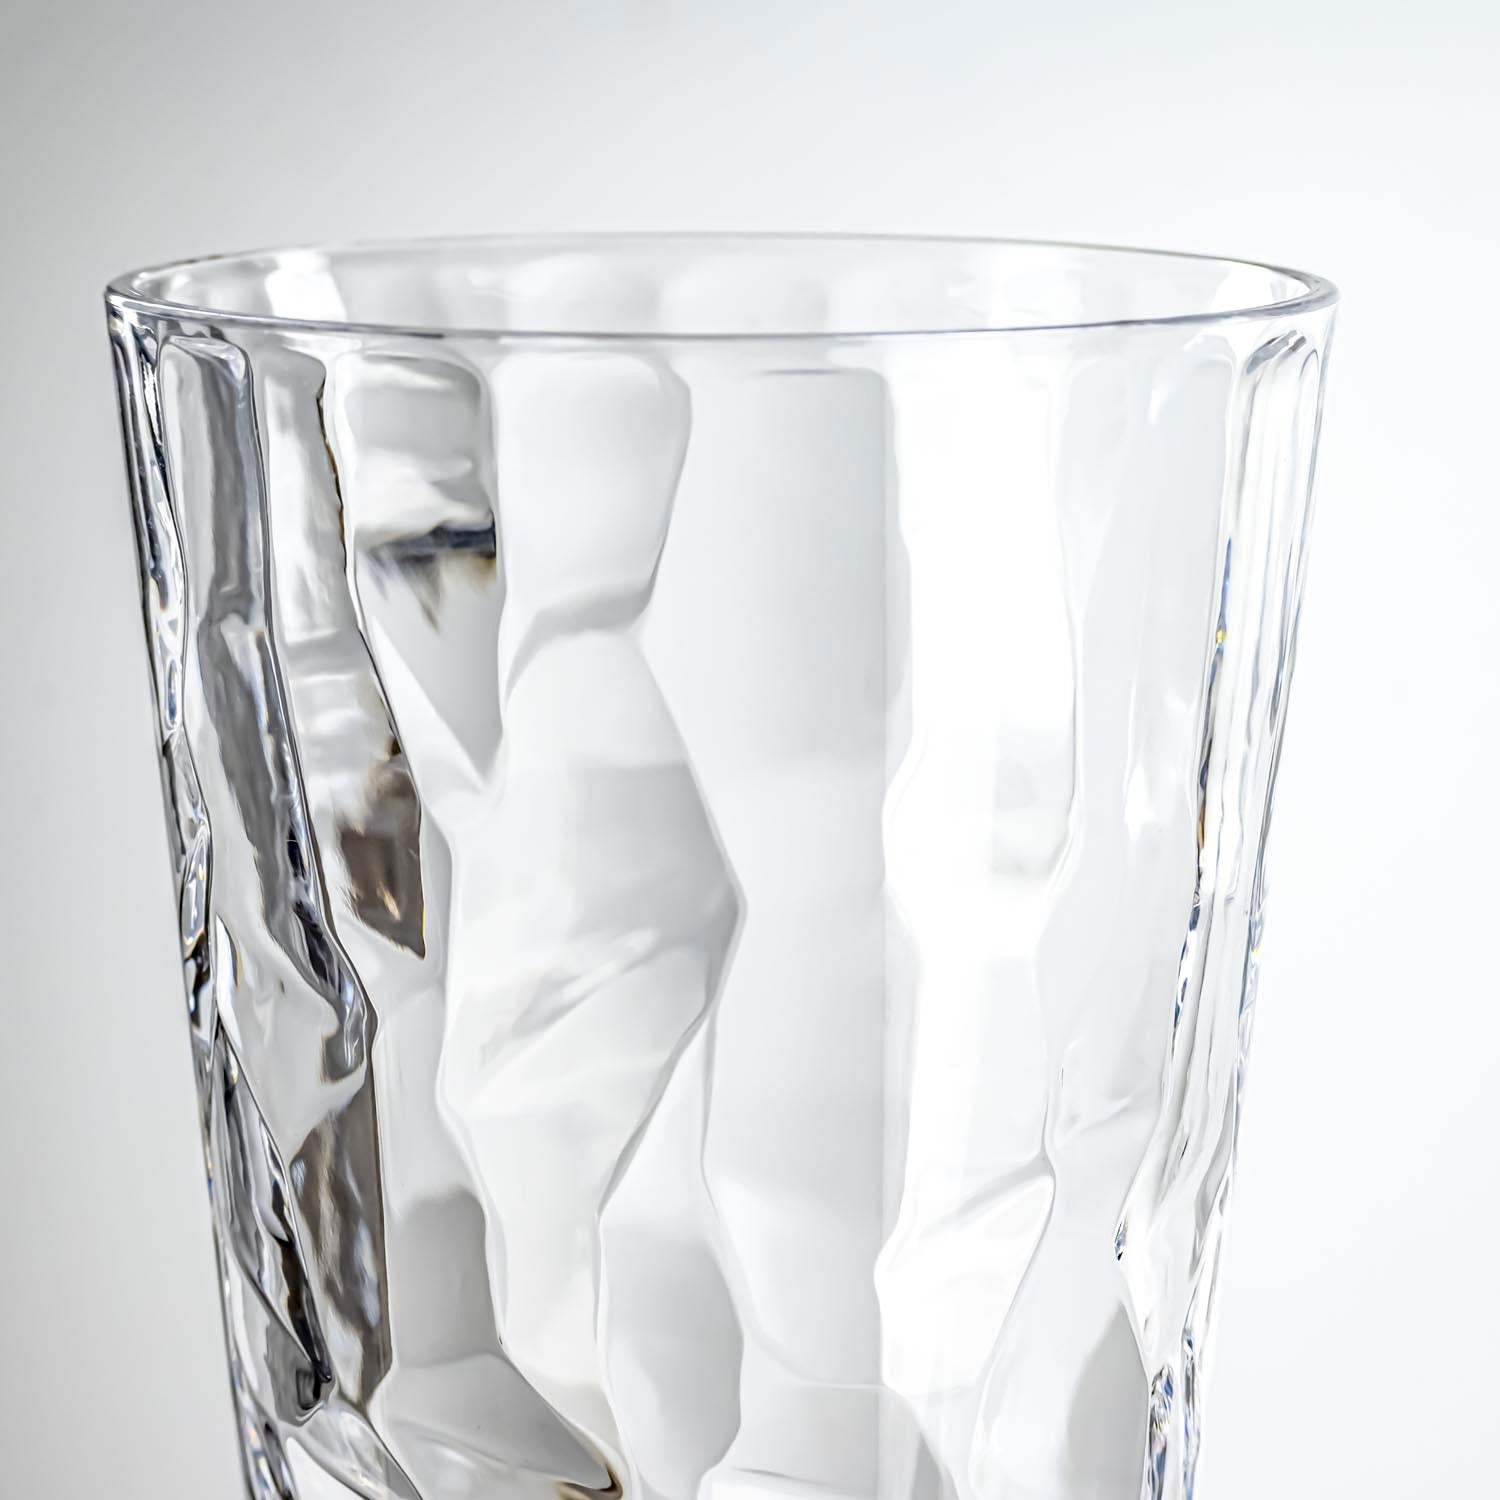 17-ounce clear acrylic tumbler glass from the Merritt Designs Cascade collection. Detailed view on white background